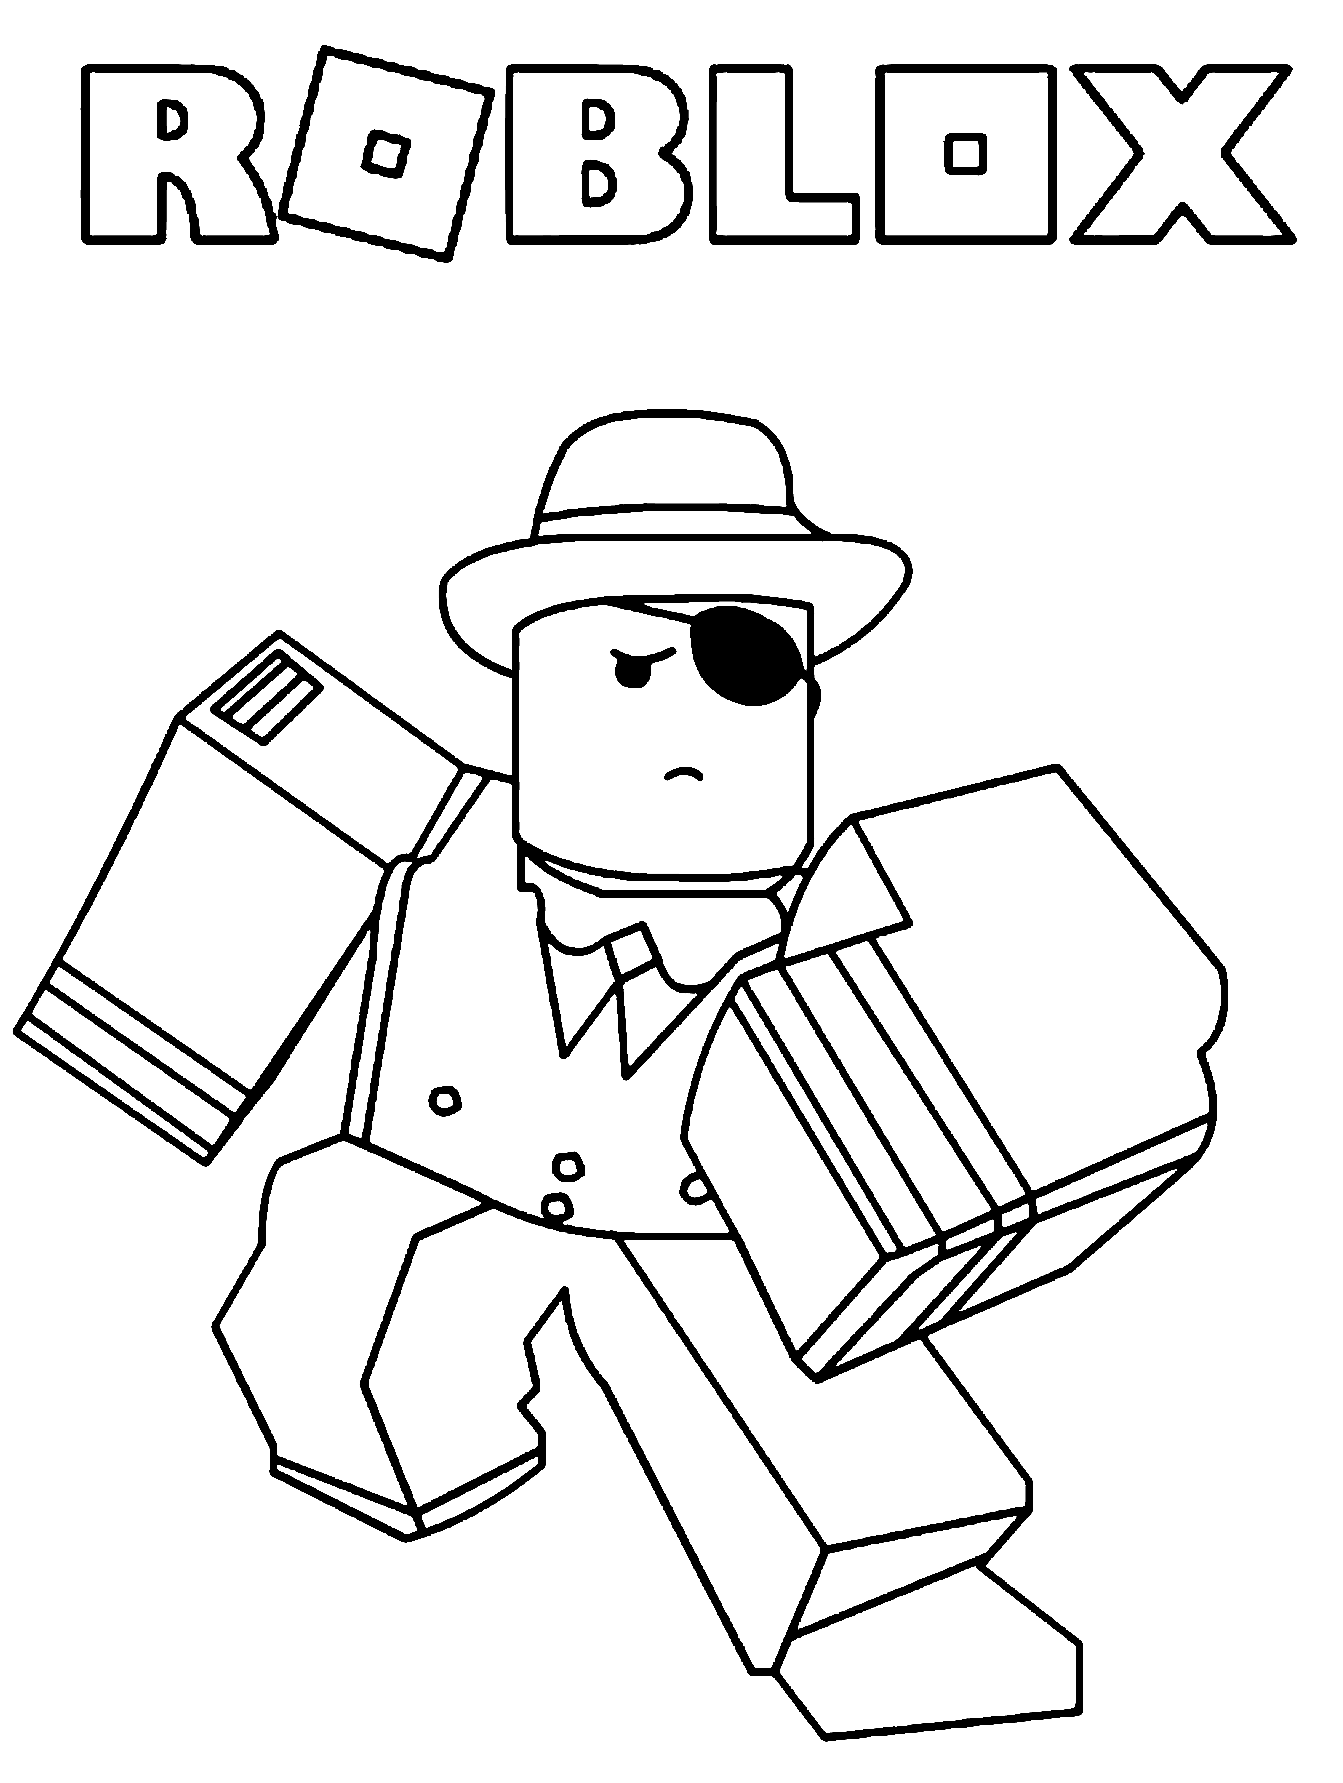 Roblox Coloring Pages Free - Infoupdate.org